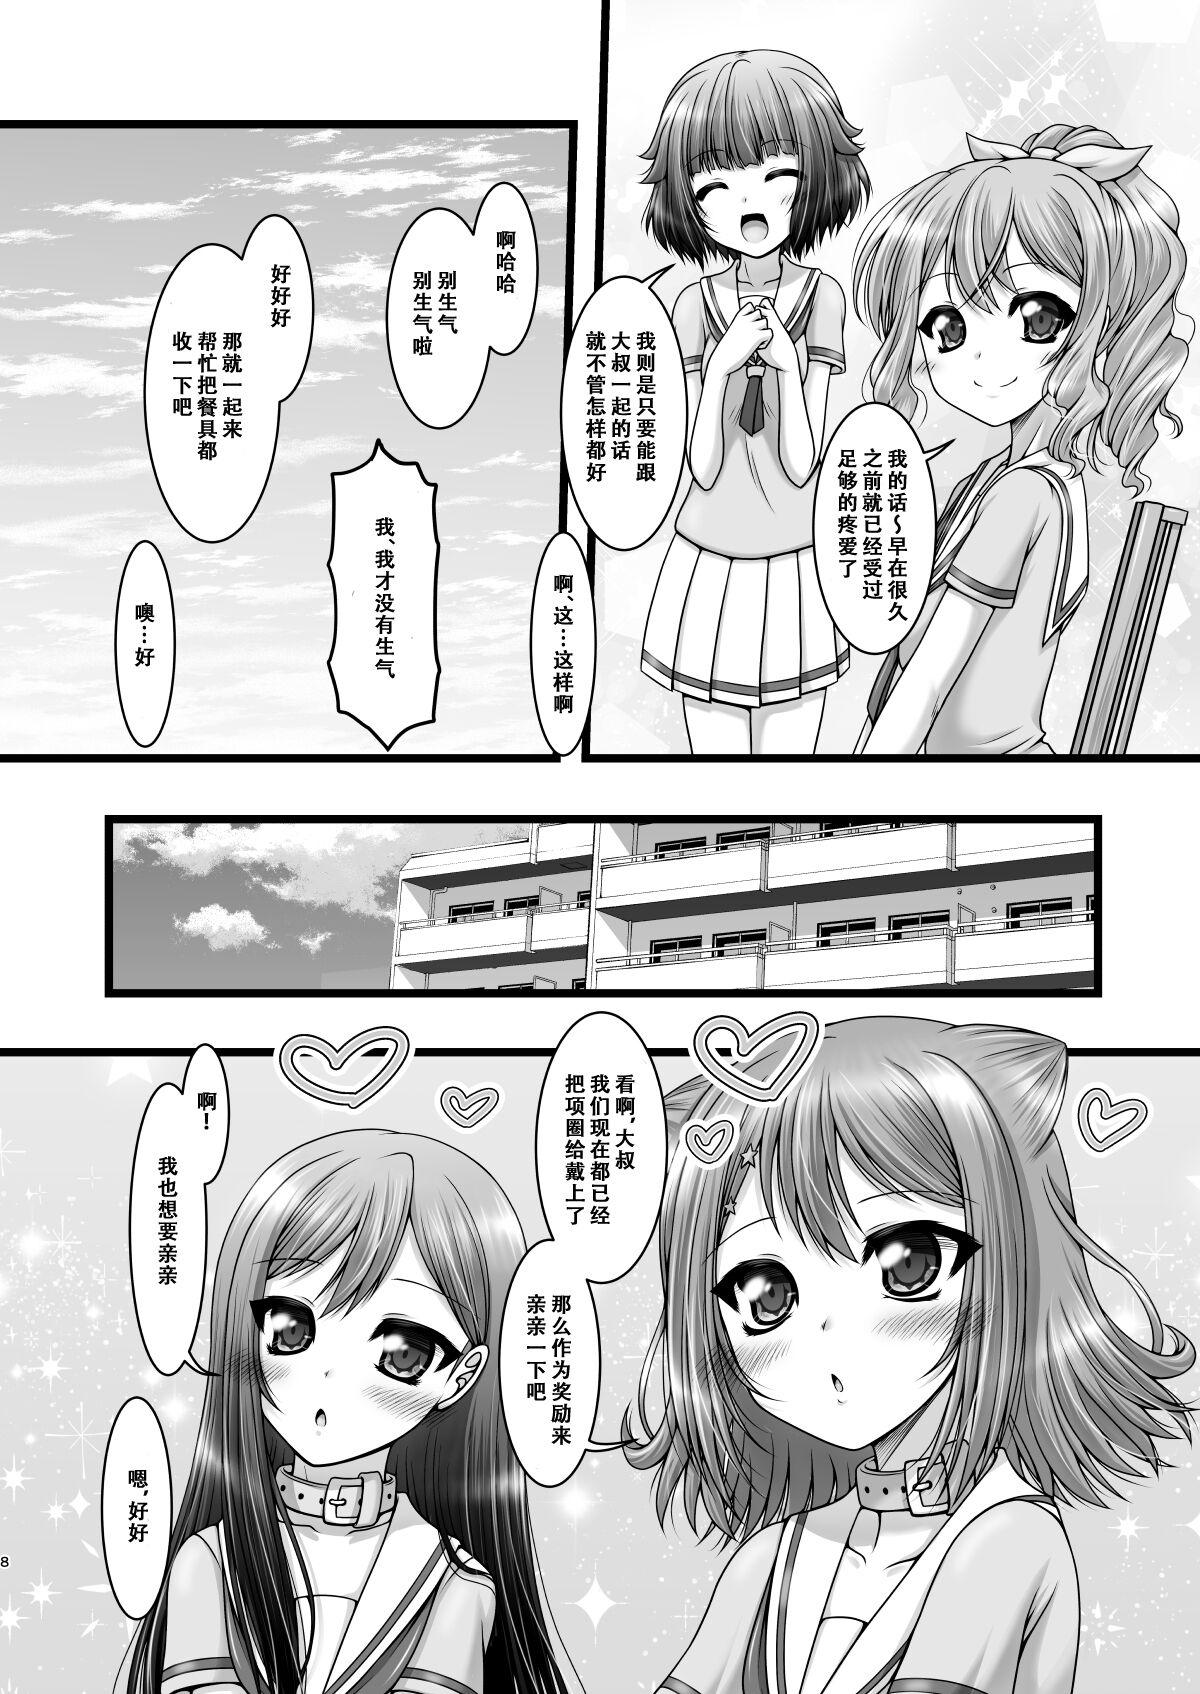 Ffm Twinkle Express - Bang dream Clothed Sex - Page 8